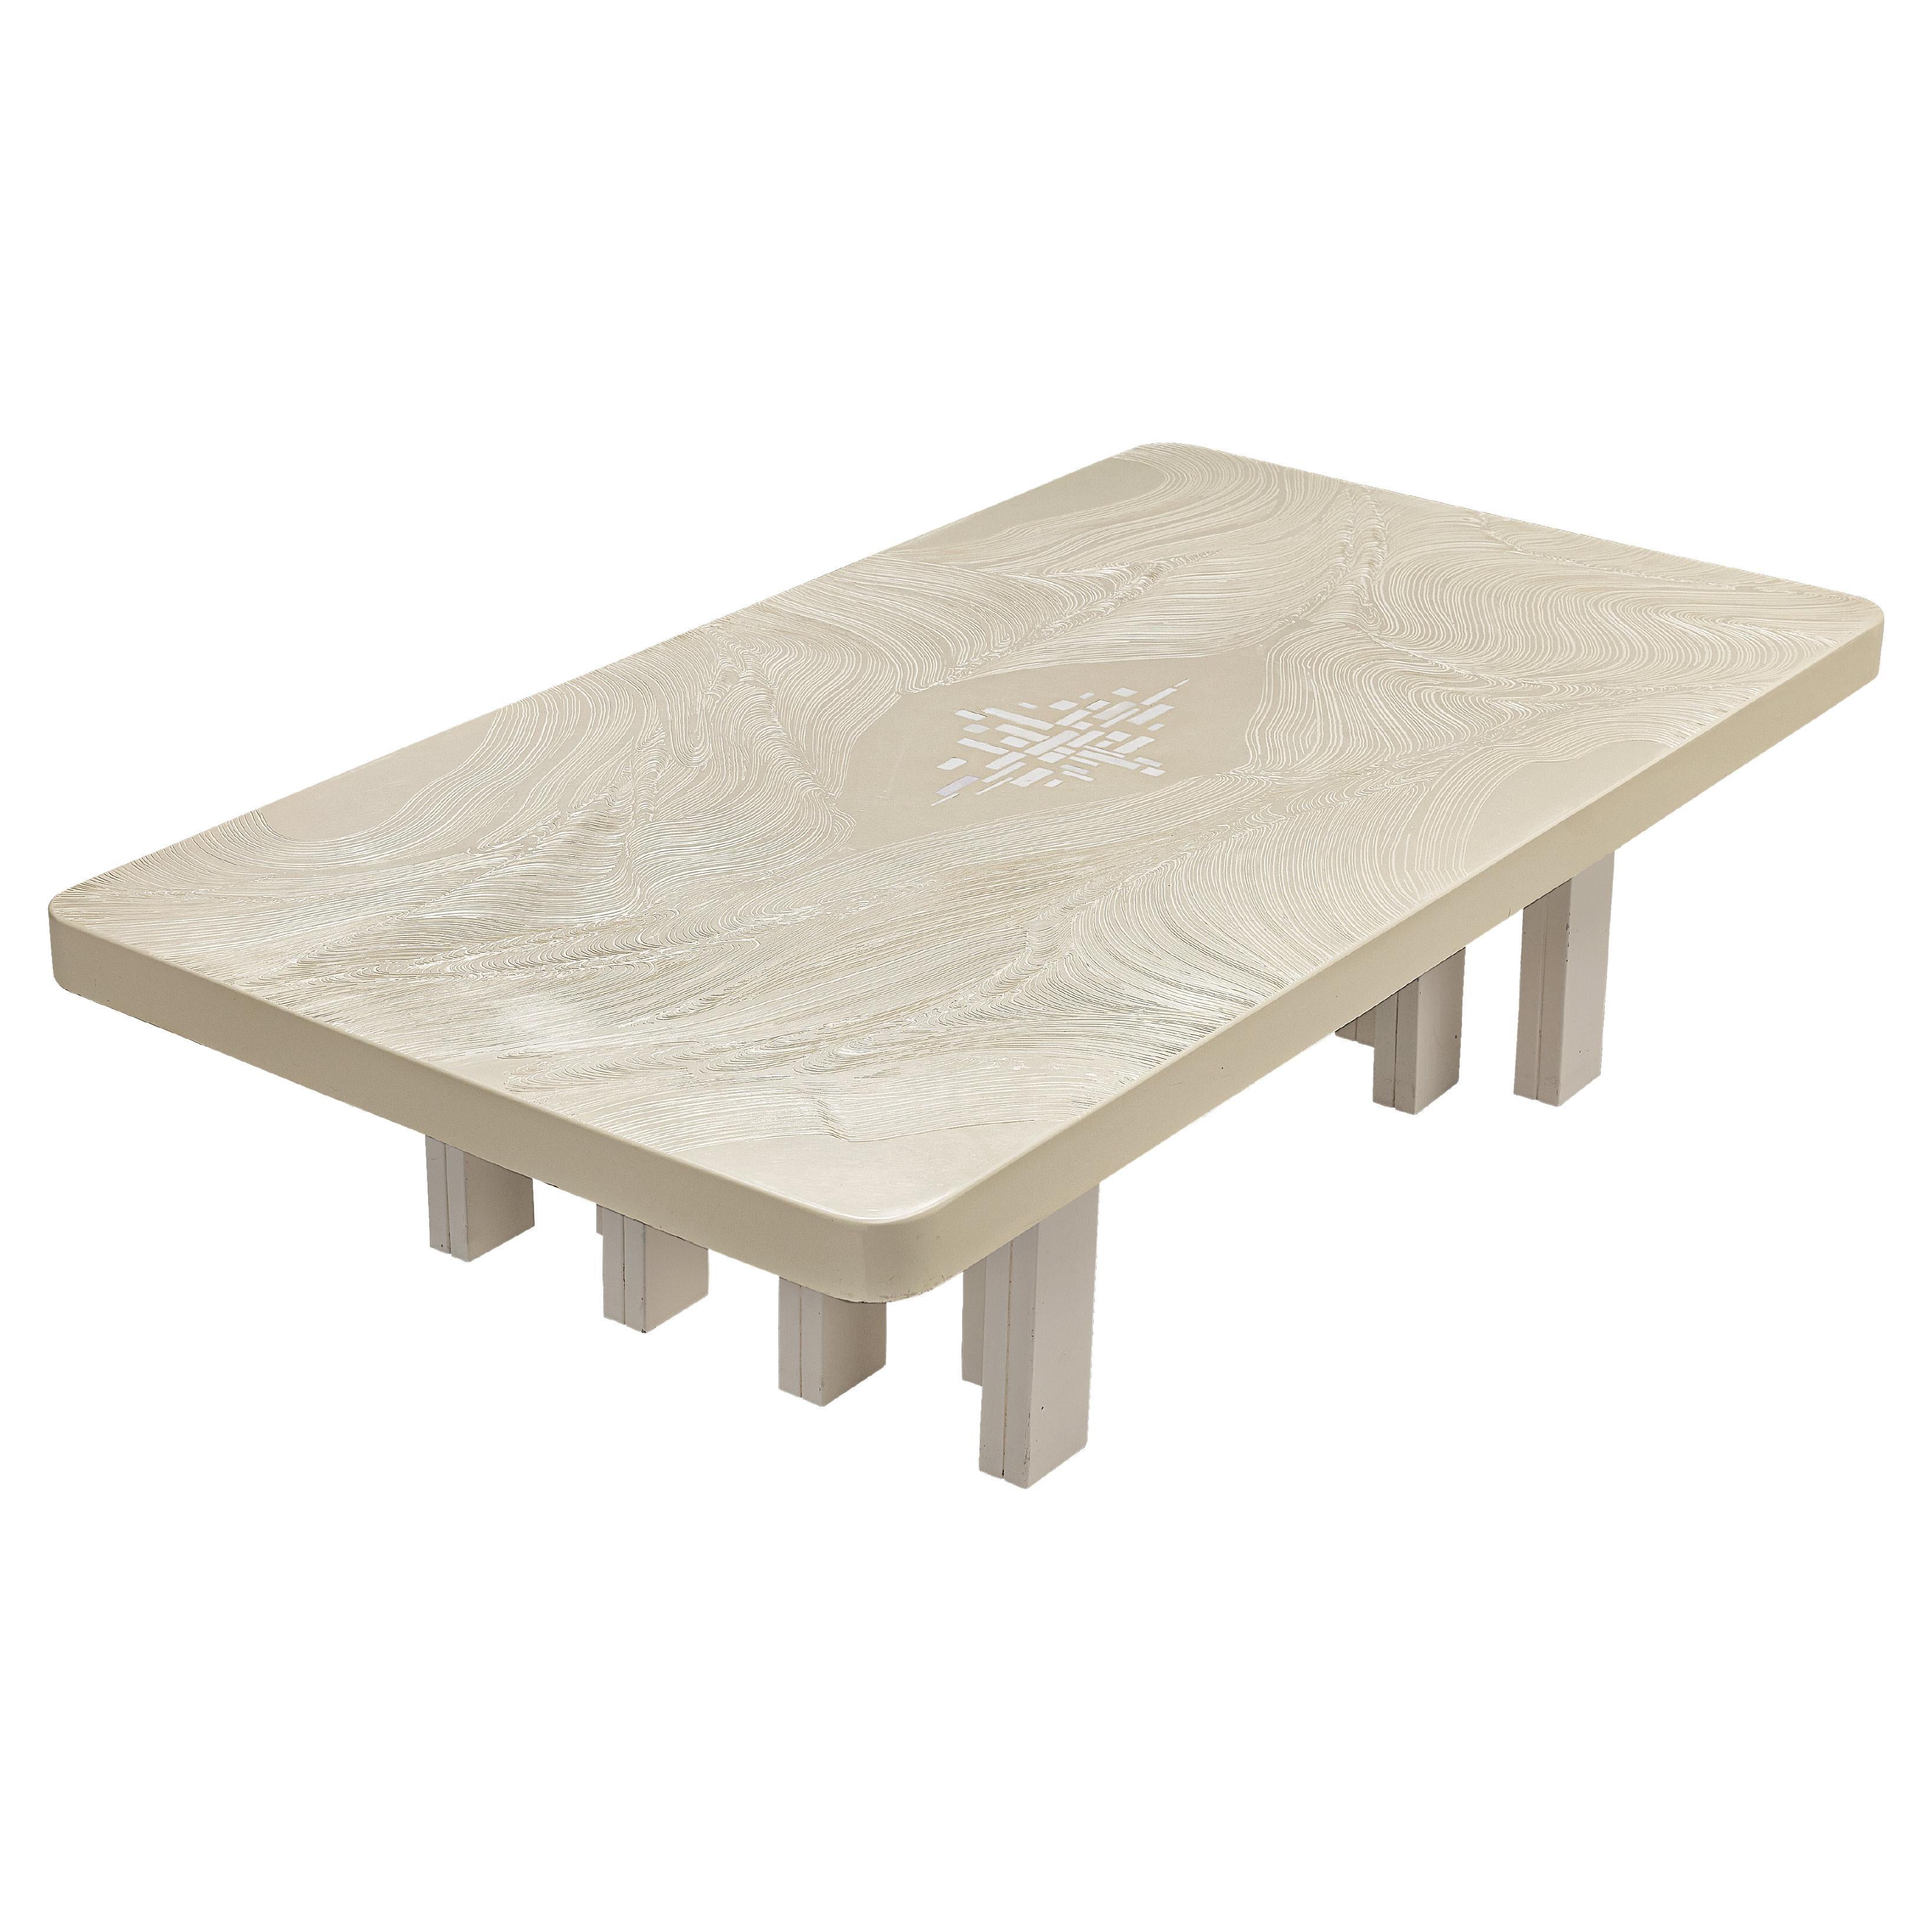 Jean Claude Dresse Coffee Table in White Resin